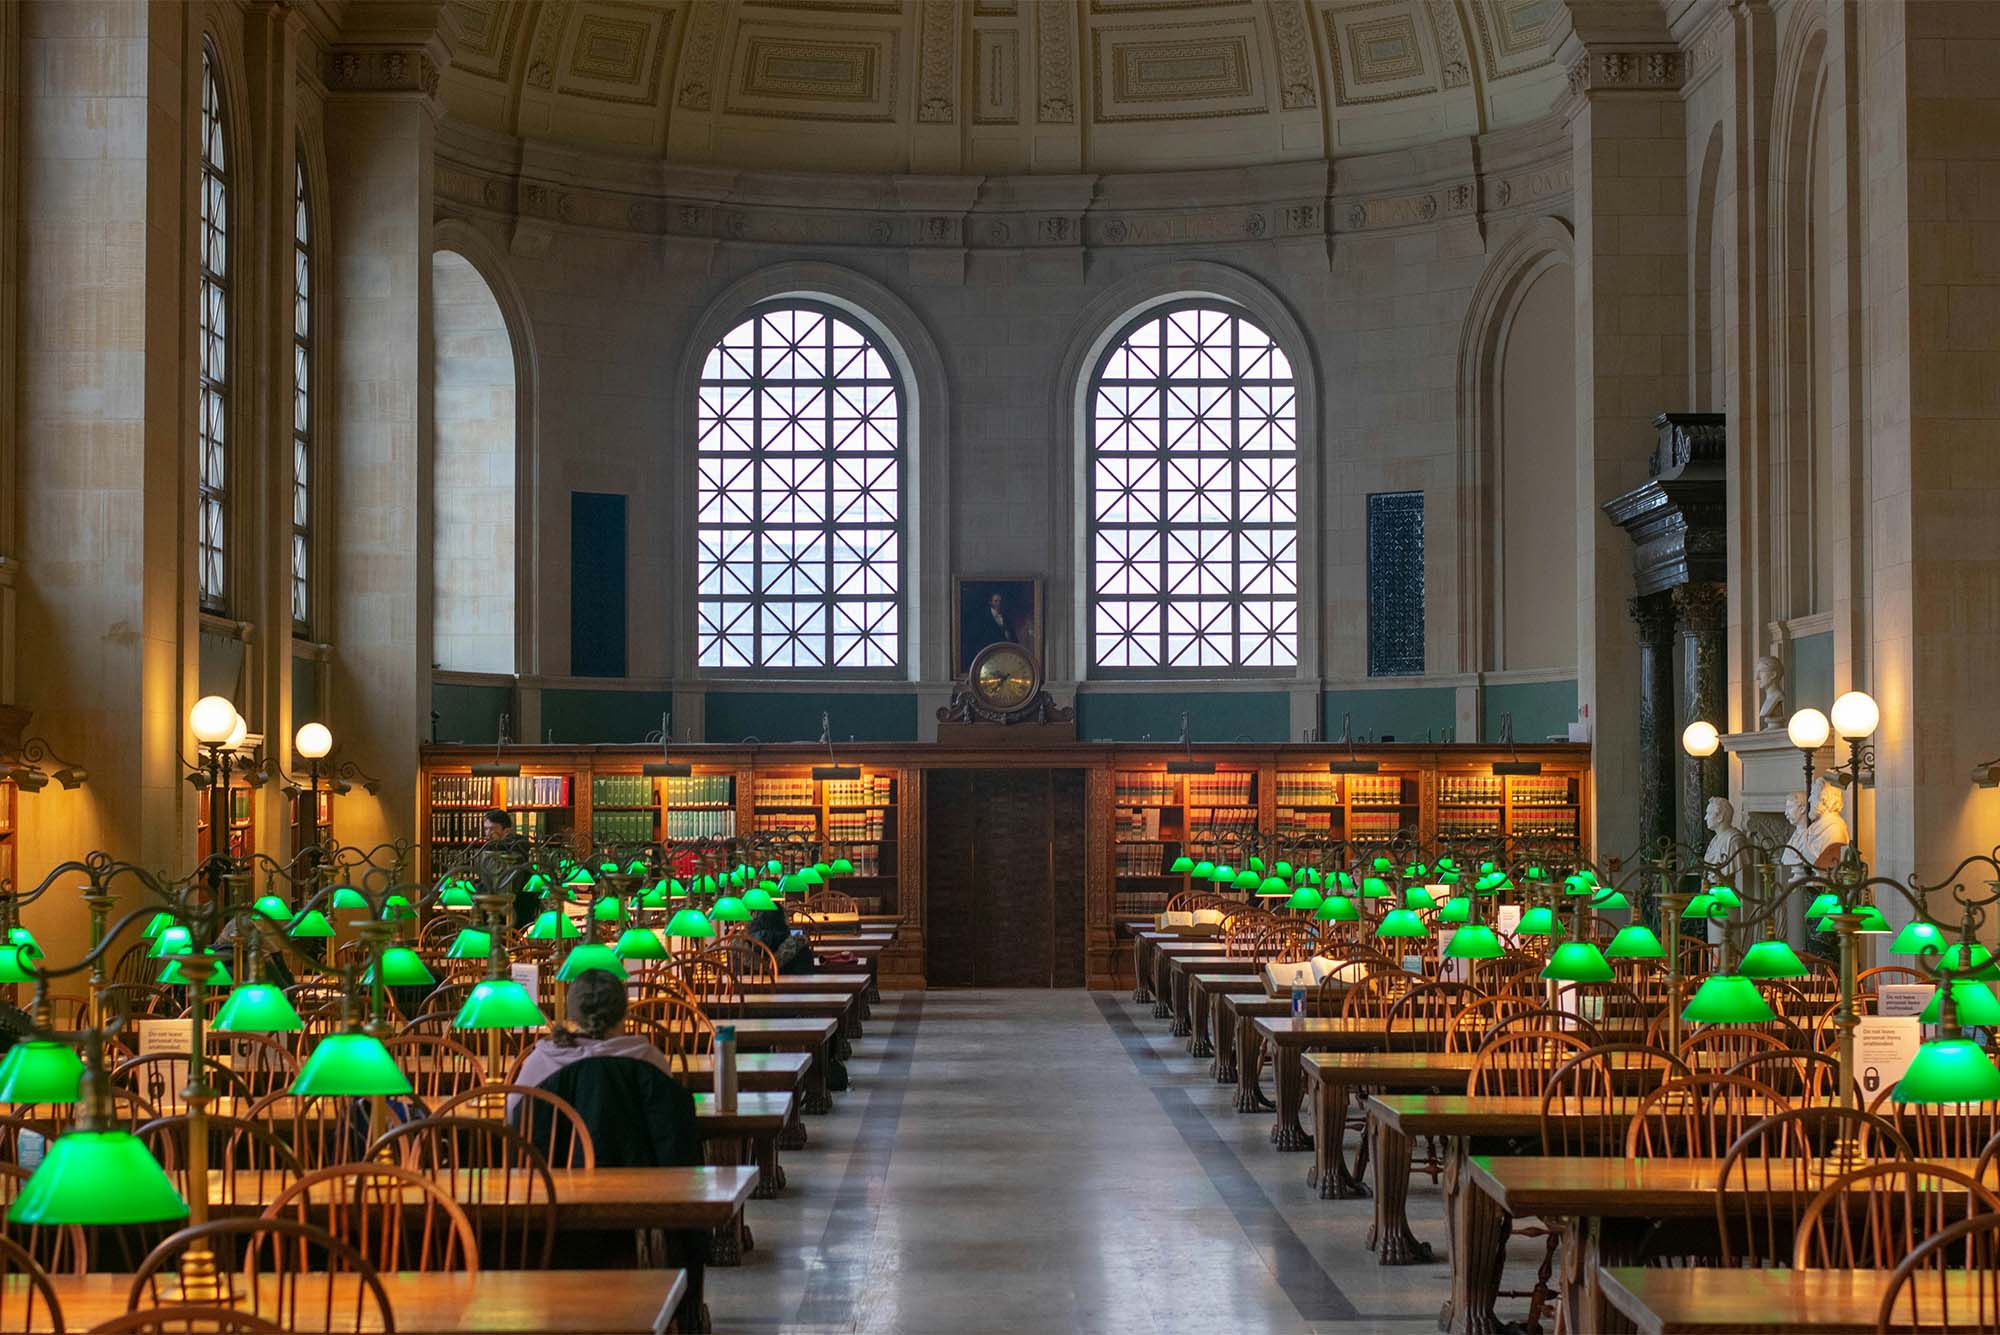 Photo: The inside of the Boston Public library, with ornate wood and stonework among large rows of seats